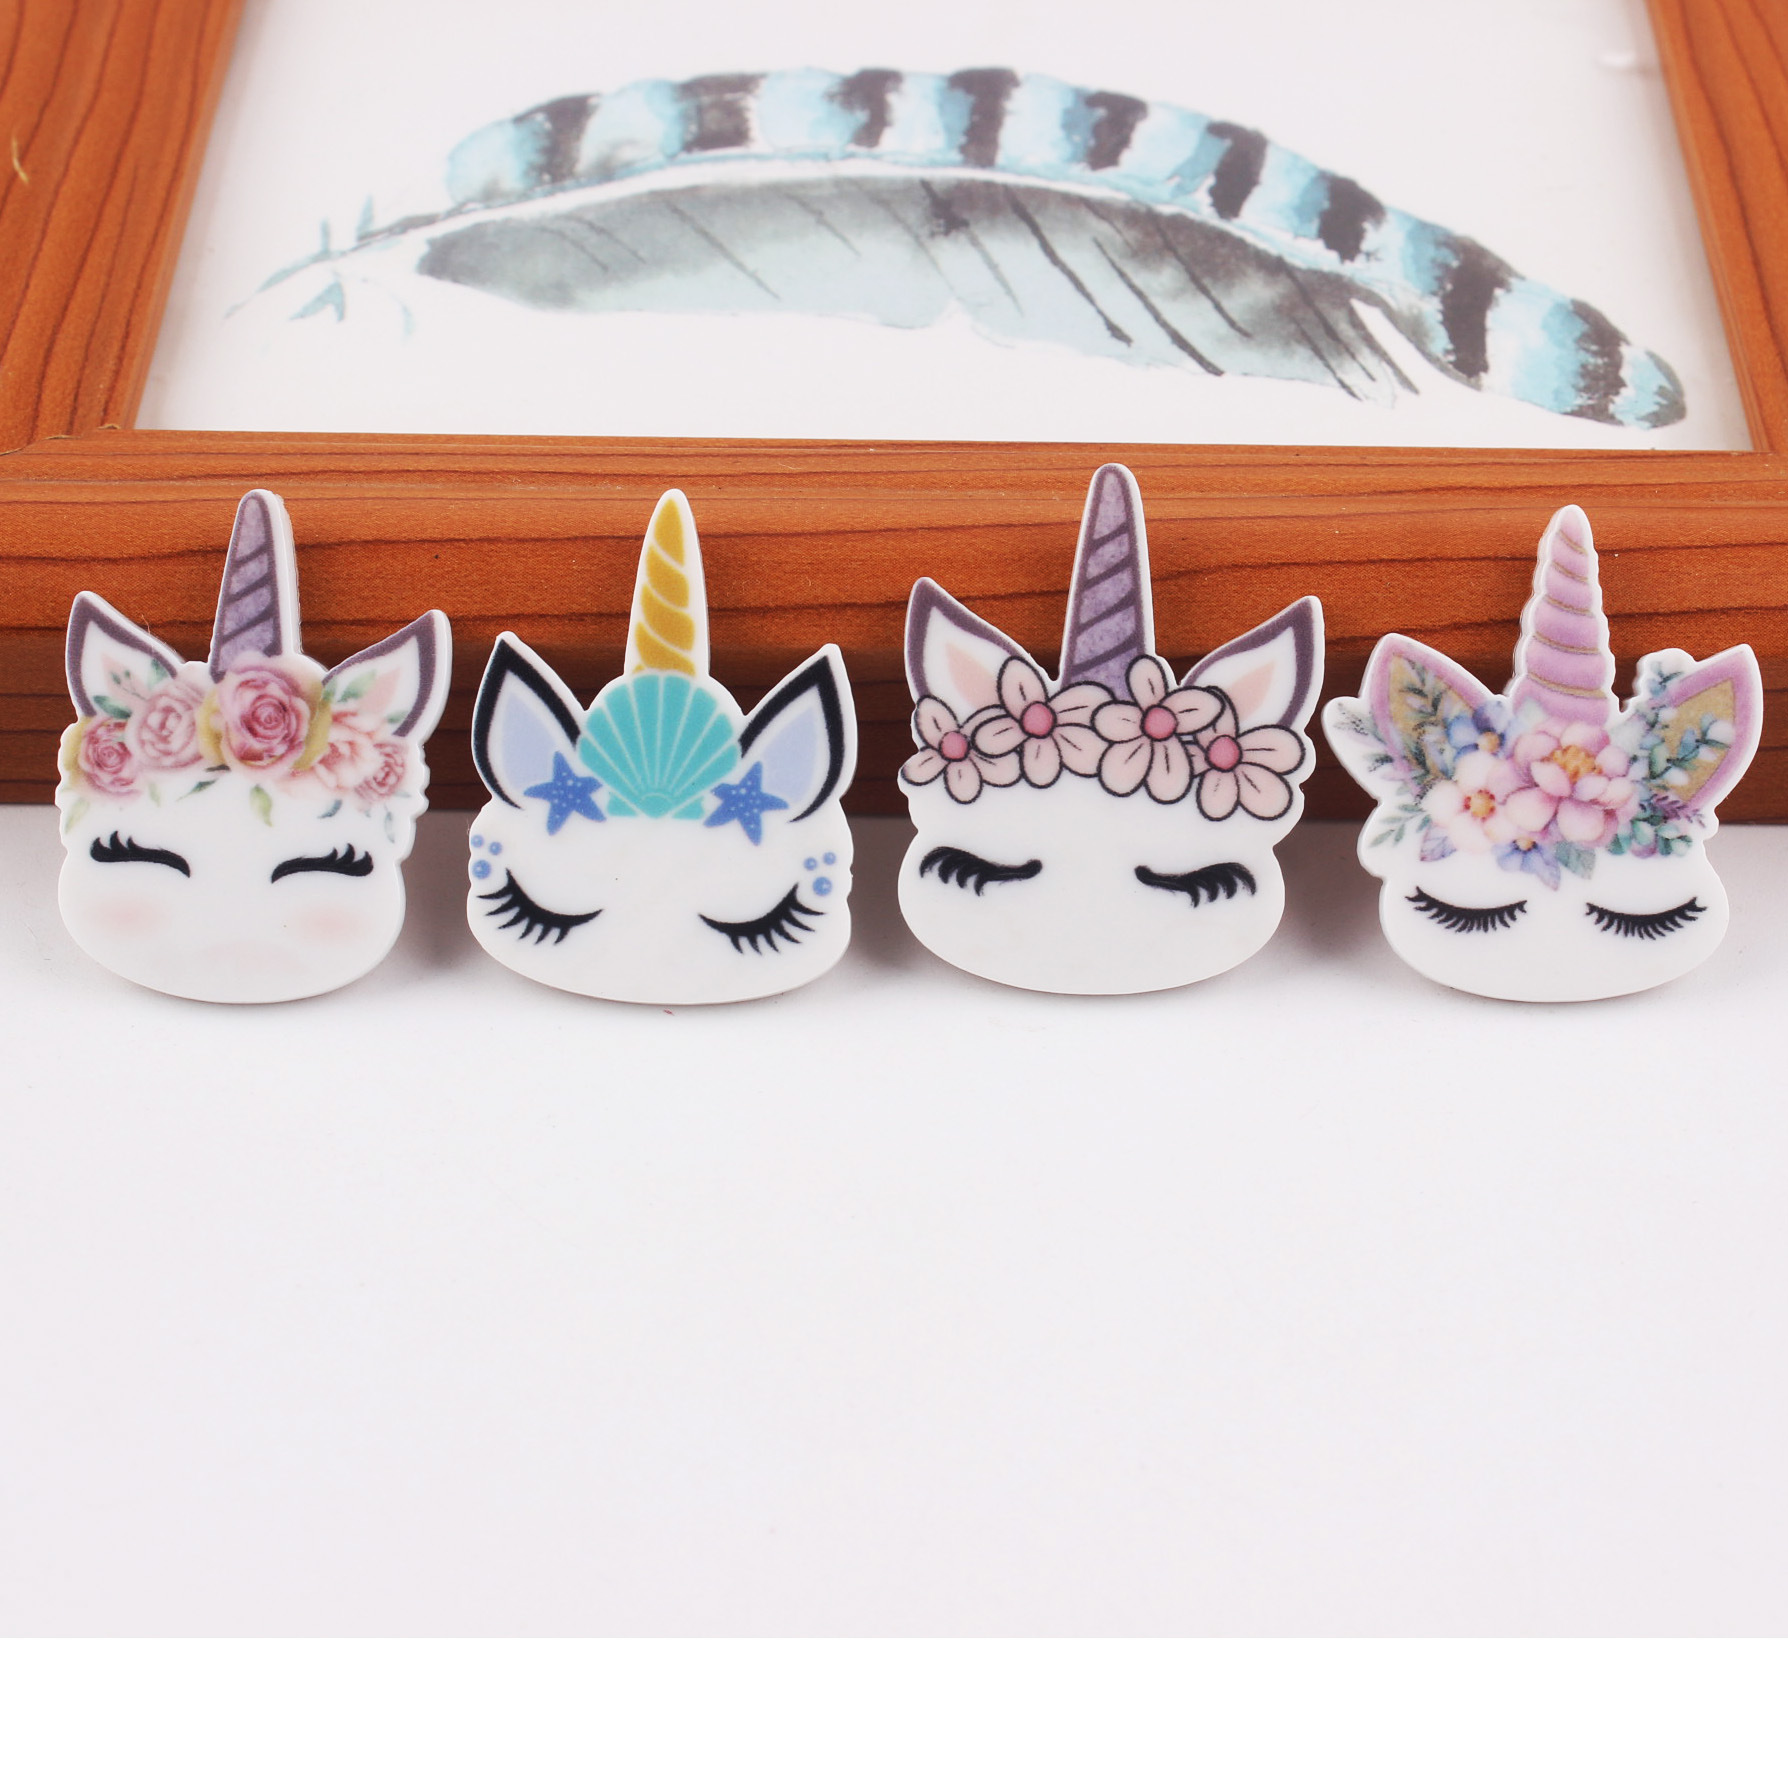 New Acrylic Plate Cartoon Unicorn Patch Children's Hair Accessories Clothing Accessories Popular Jewelry Accessories